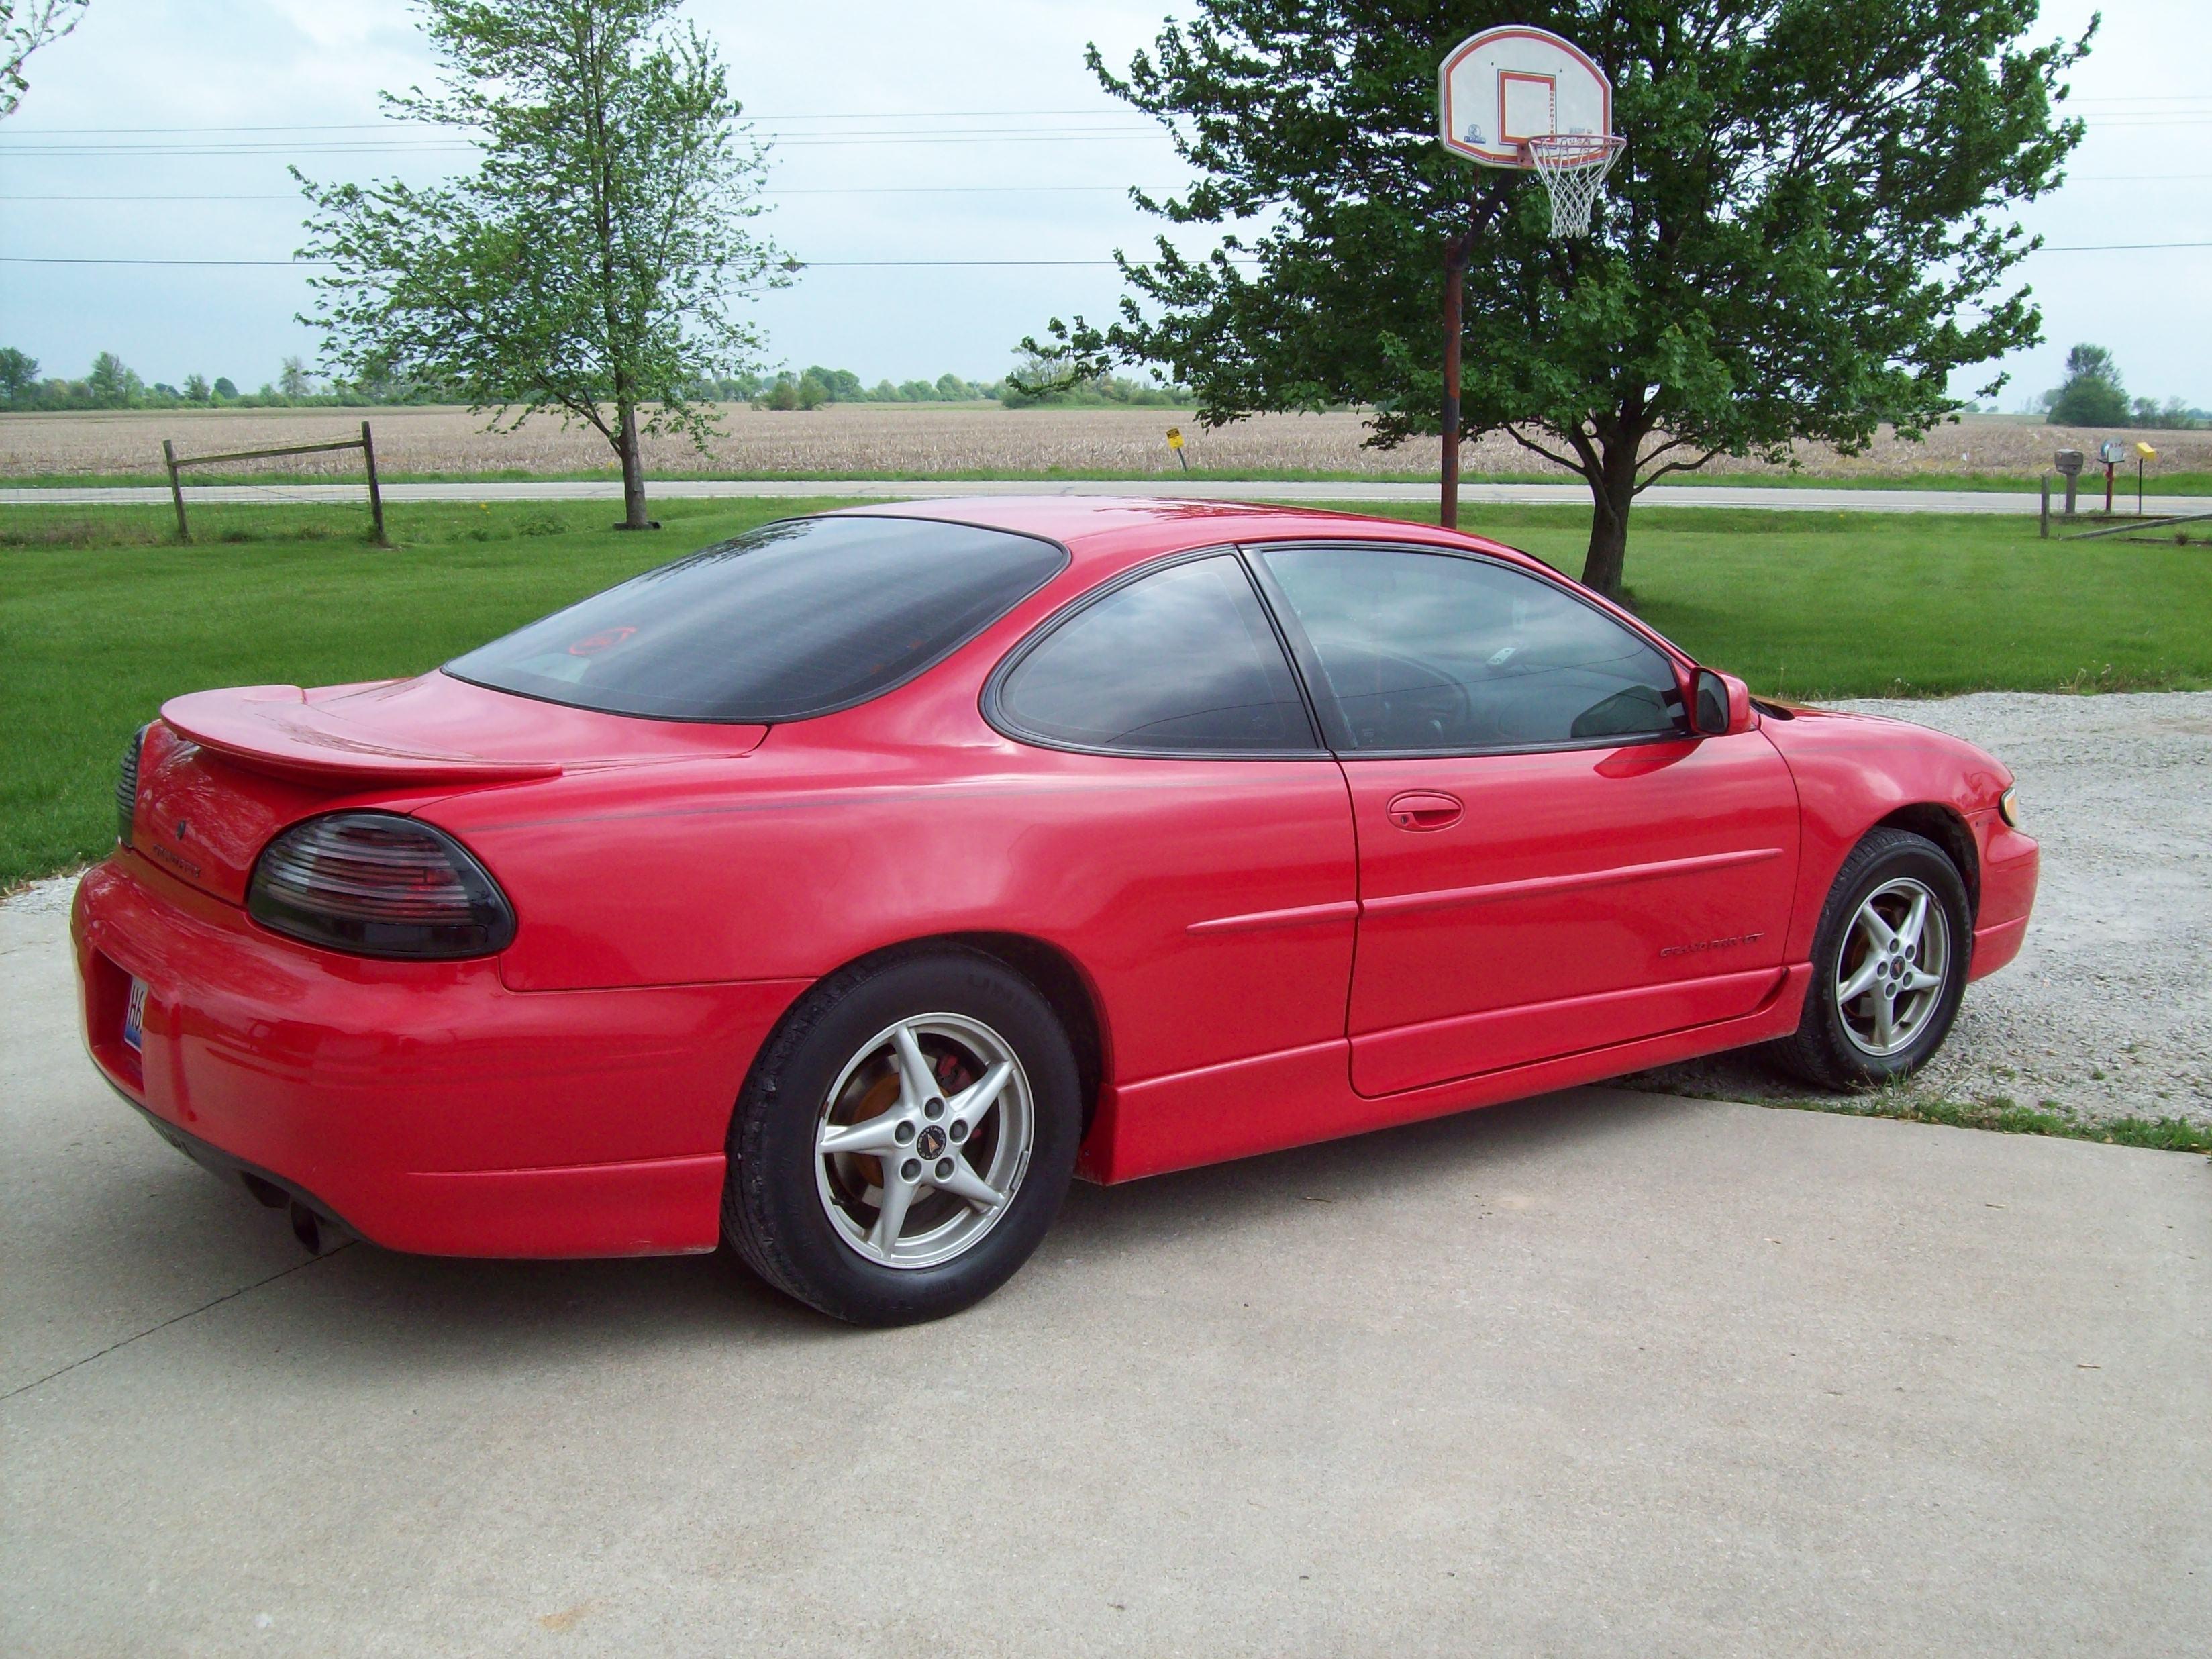 1999 Pontiac Grand Prix, the official car of that guy who was a wannabe  football jock in school, yet somehow still peaked in high school :  r/regularcarreviews